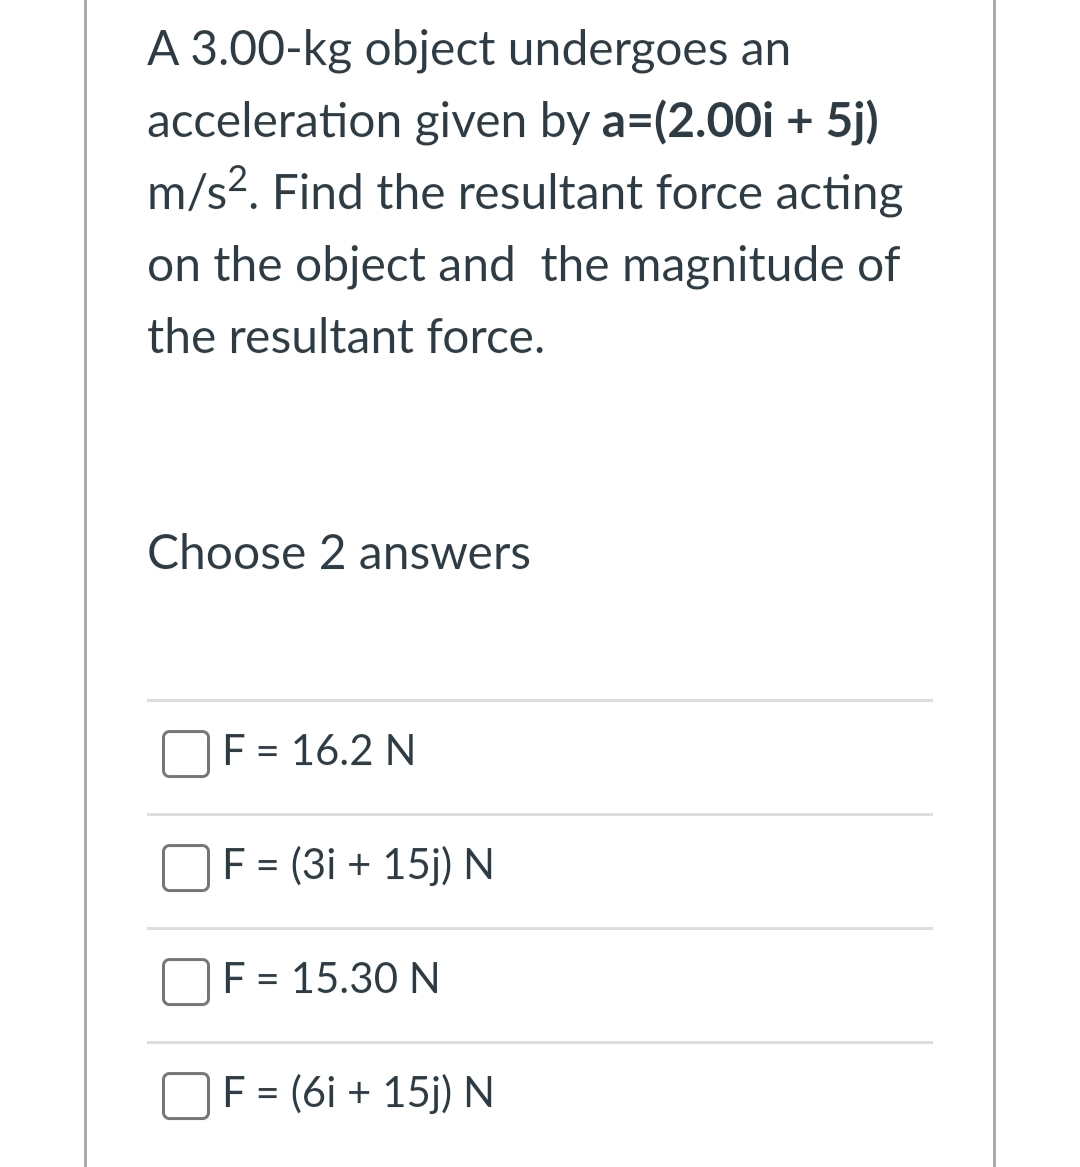 A 3.00-kg object undergoes an
acceleration given by a=(2.00i + 5j)
m/s?. Find the resultant force acting
on the object and the magnitude of
the resultant force.
Choose 2 answers
F = 16.2 N
F = (3i + 15j) N
F = 15.30 N
F = (6i + 15j) N
